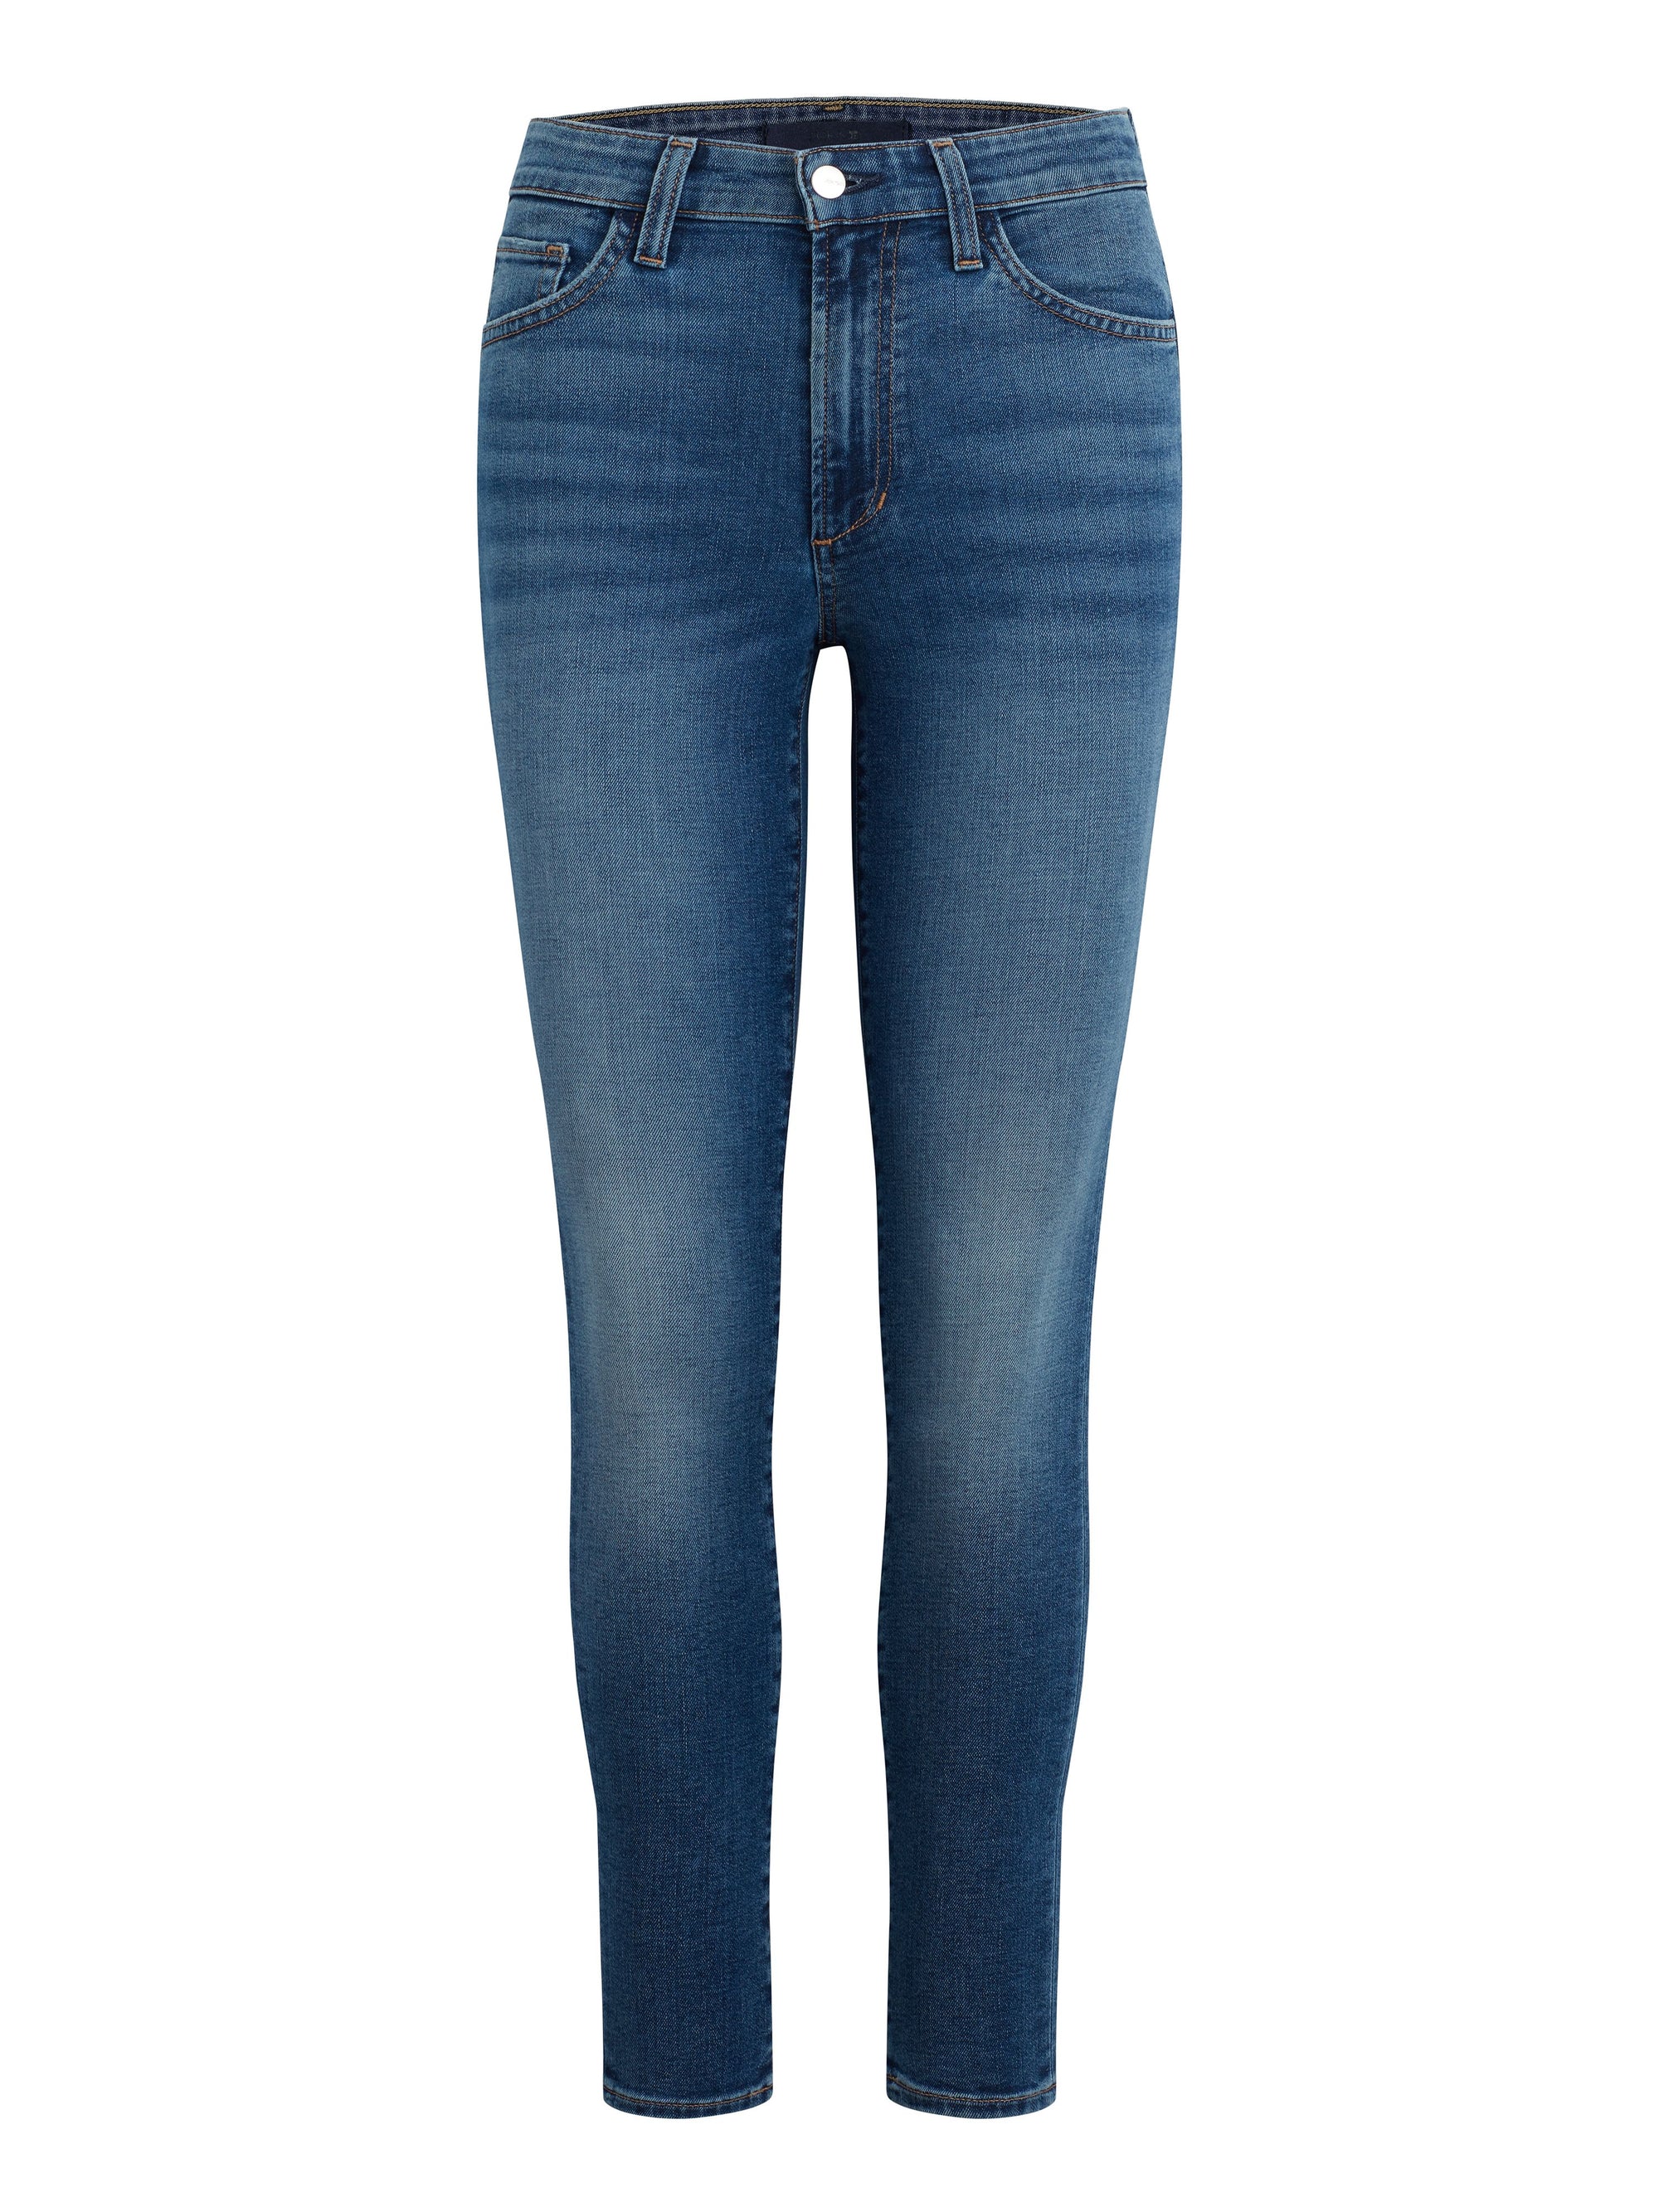 The Charlie High Rise Skinny Ankle